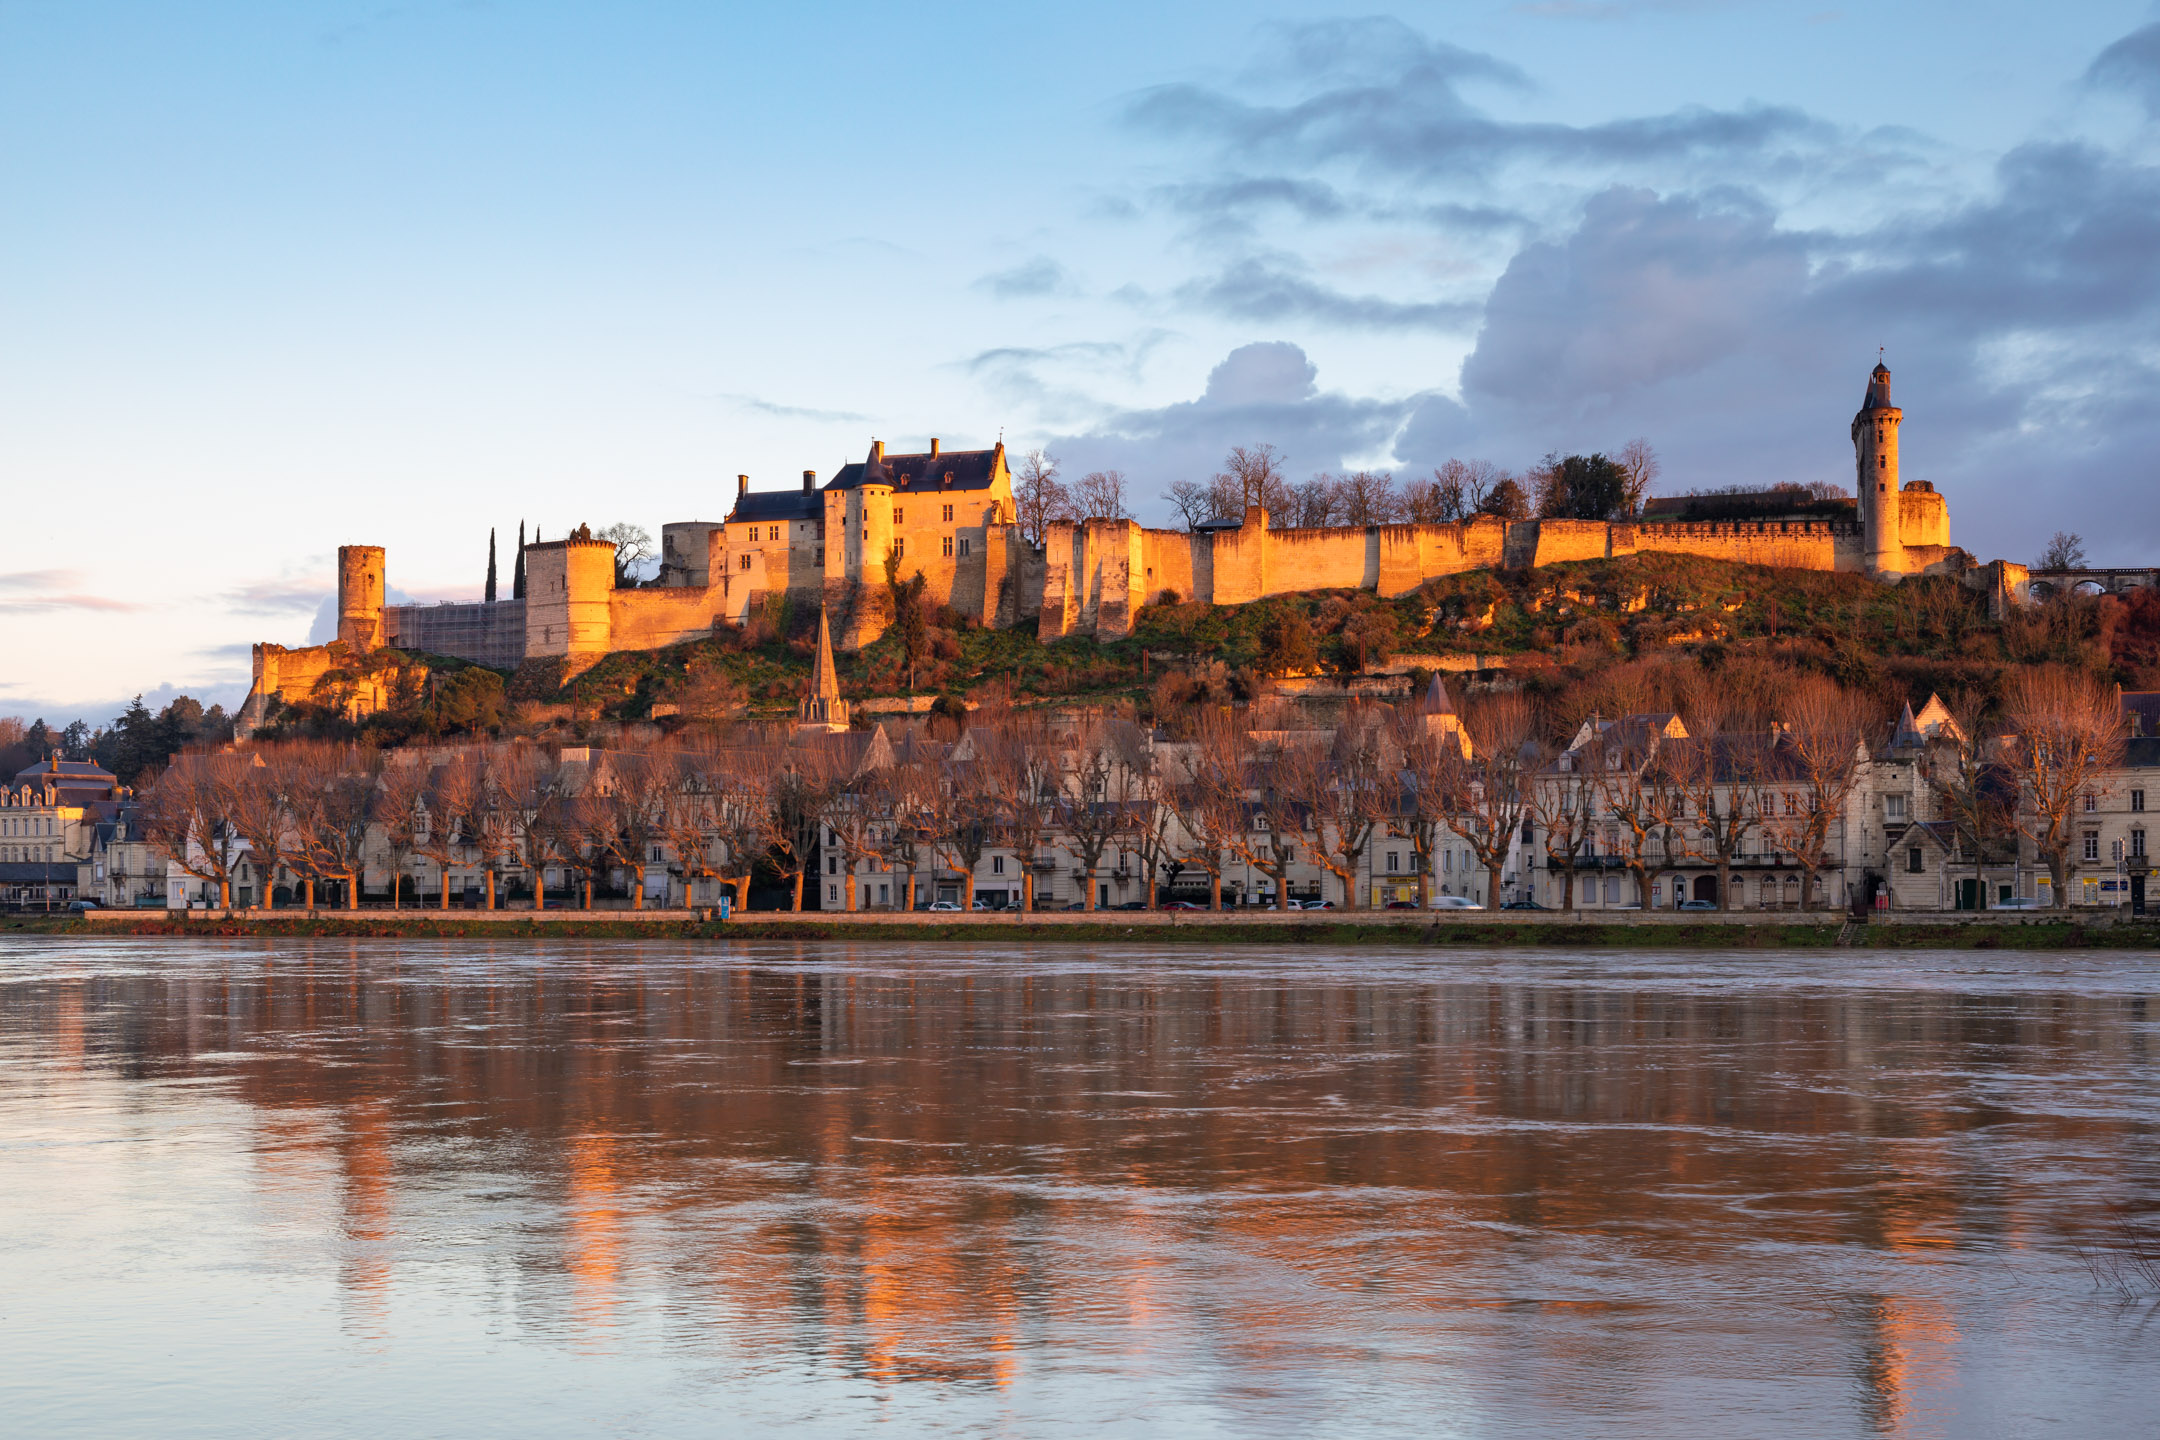 The Chateau de Chinon and river Vienne at sunrise.